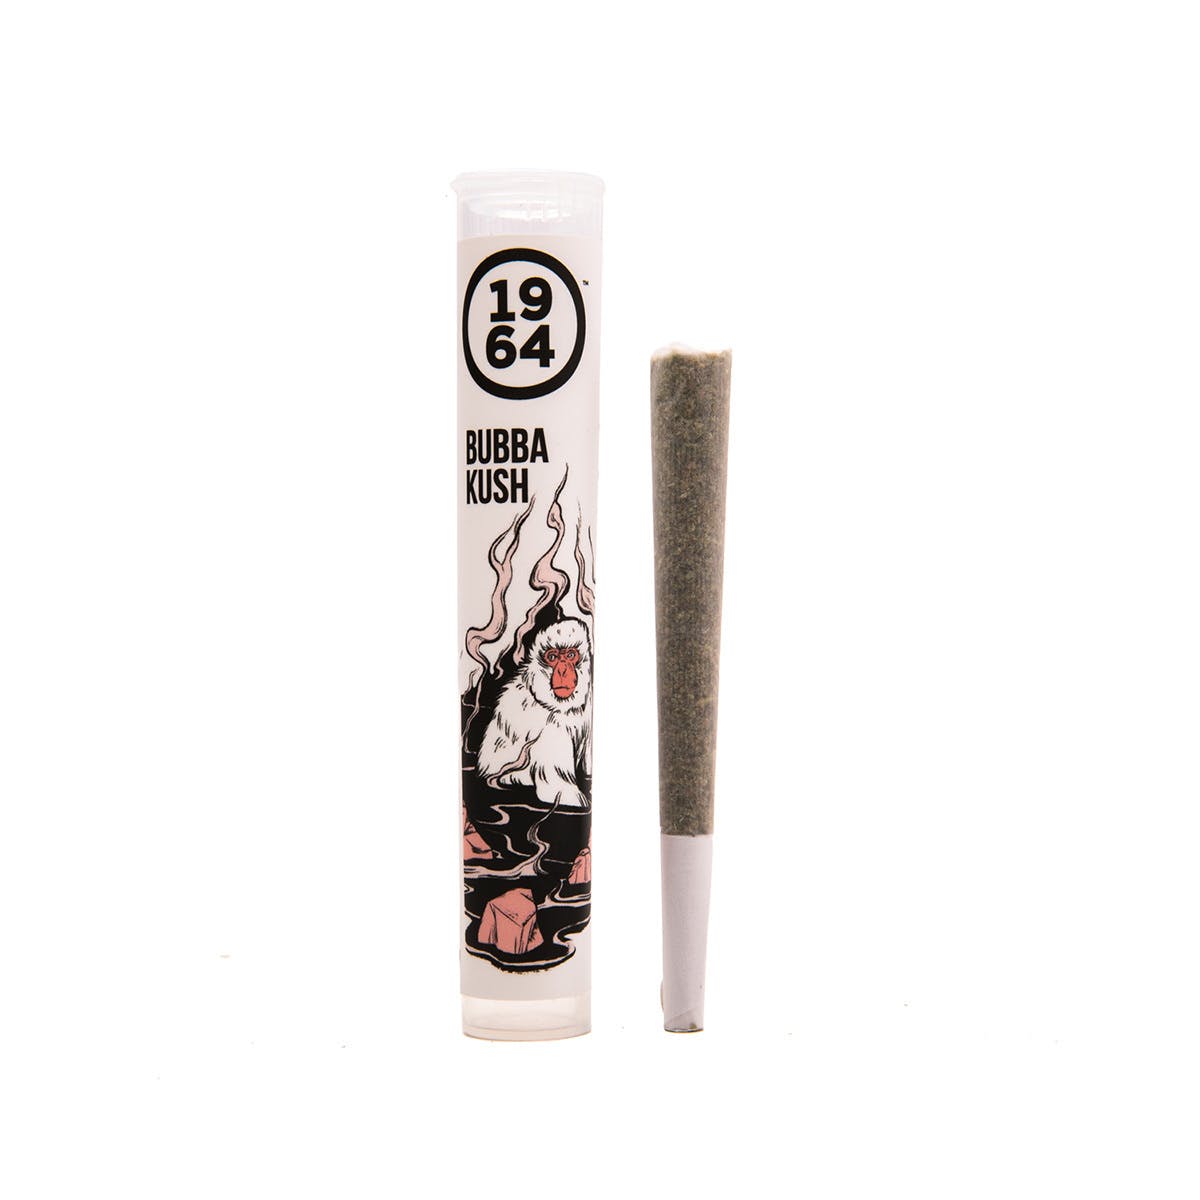 marijuana-dispensaries-the-high-note-west-in-los-angeles-bubba-kush-pre-roll